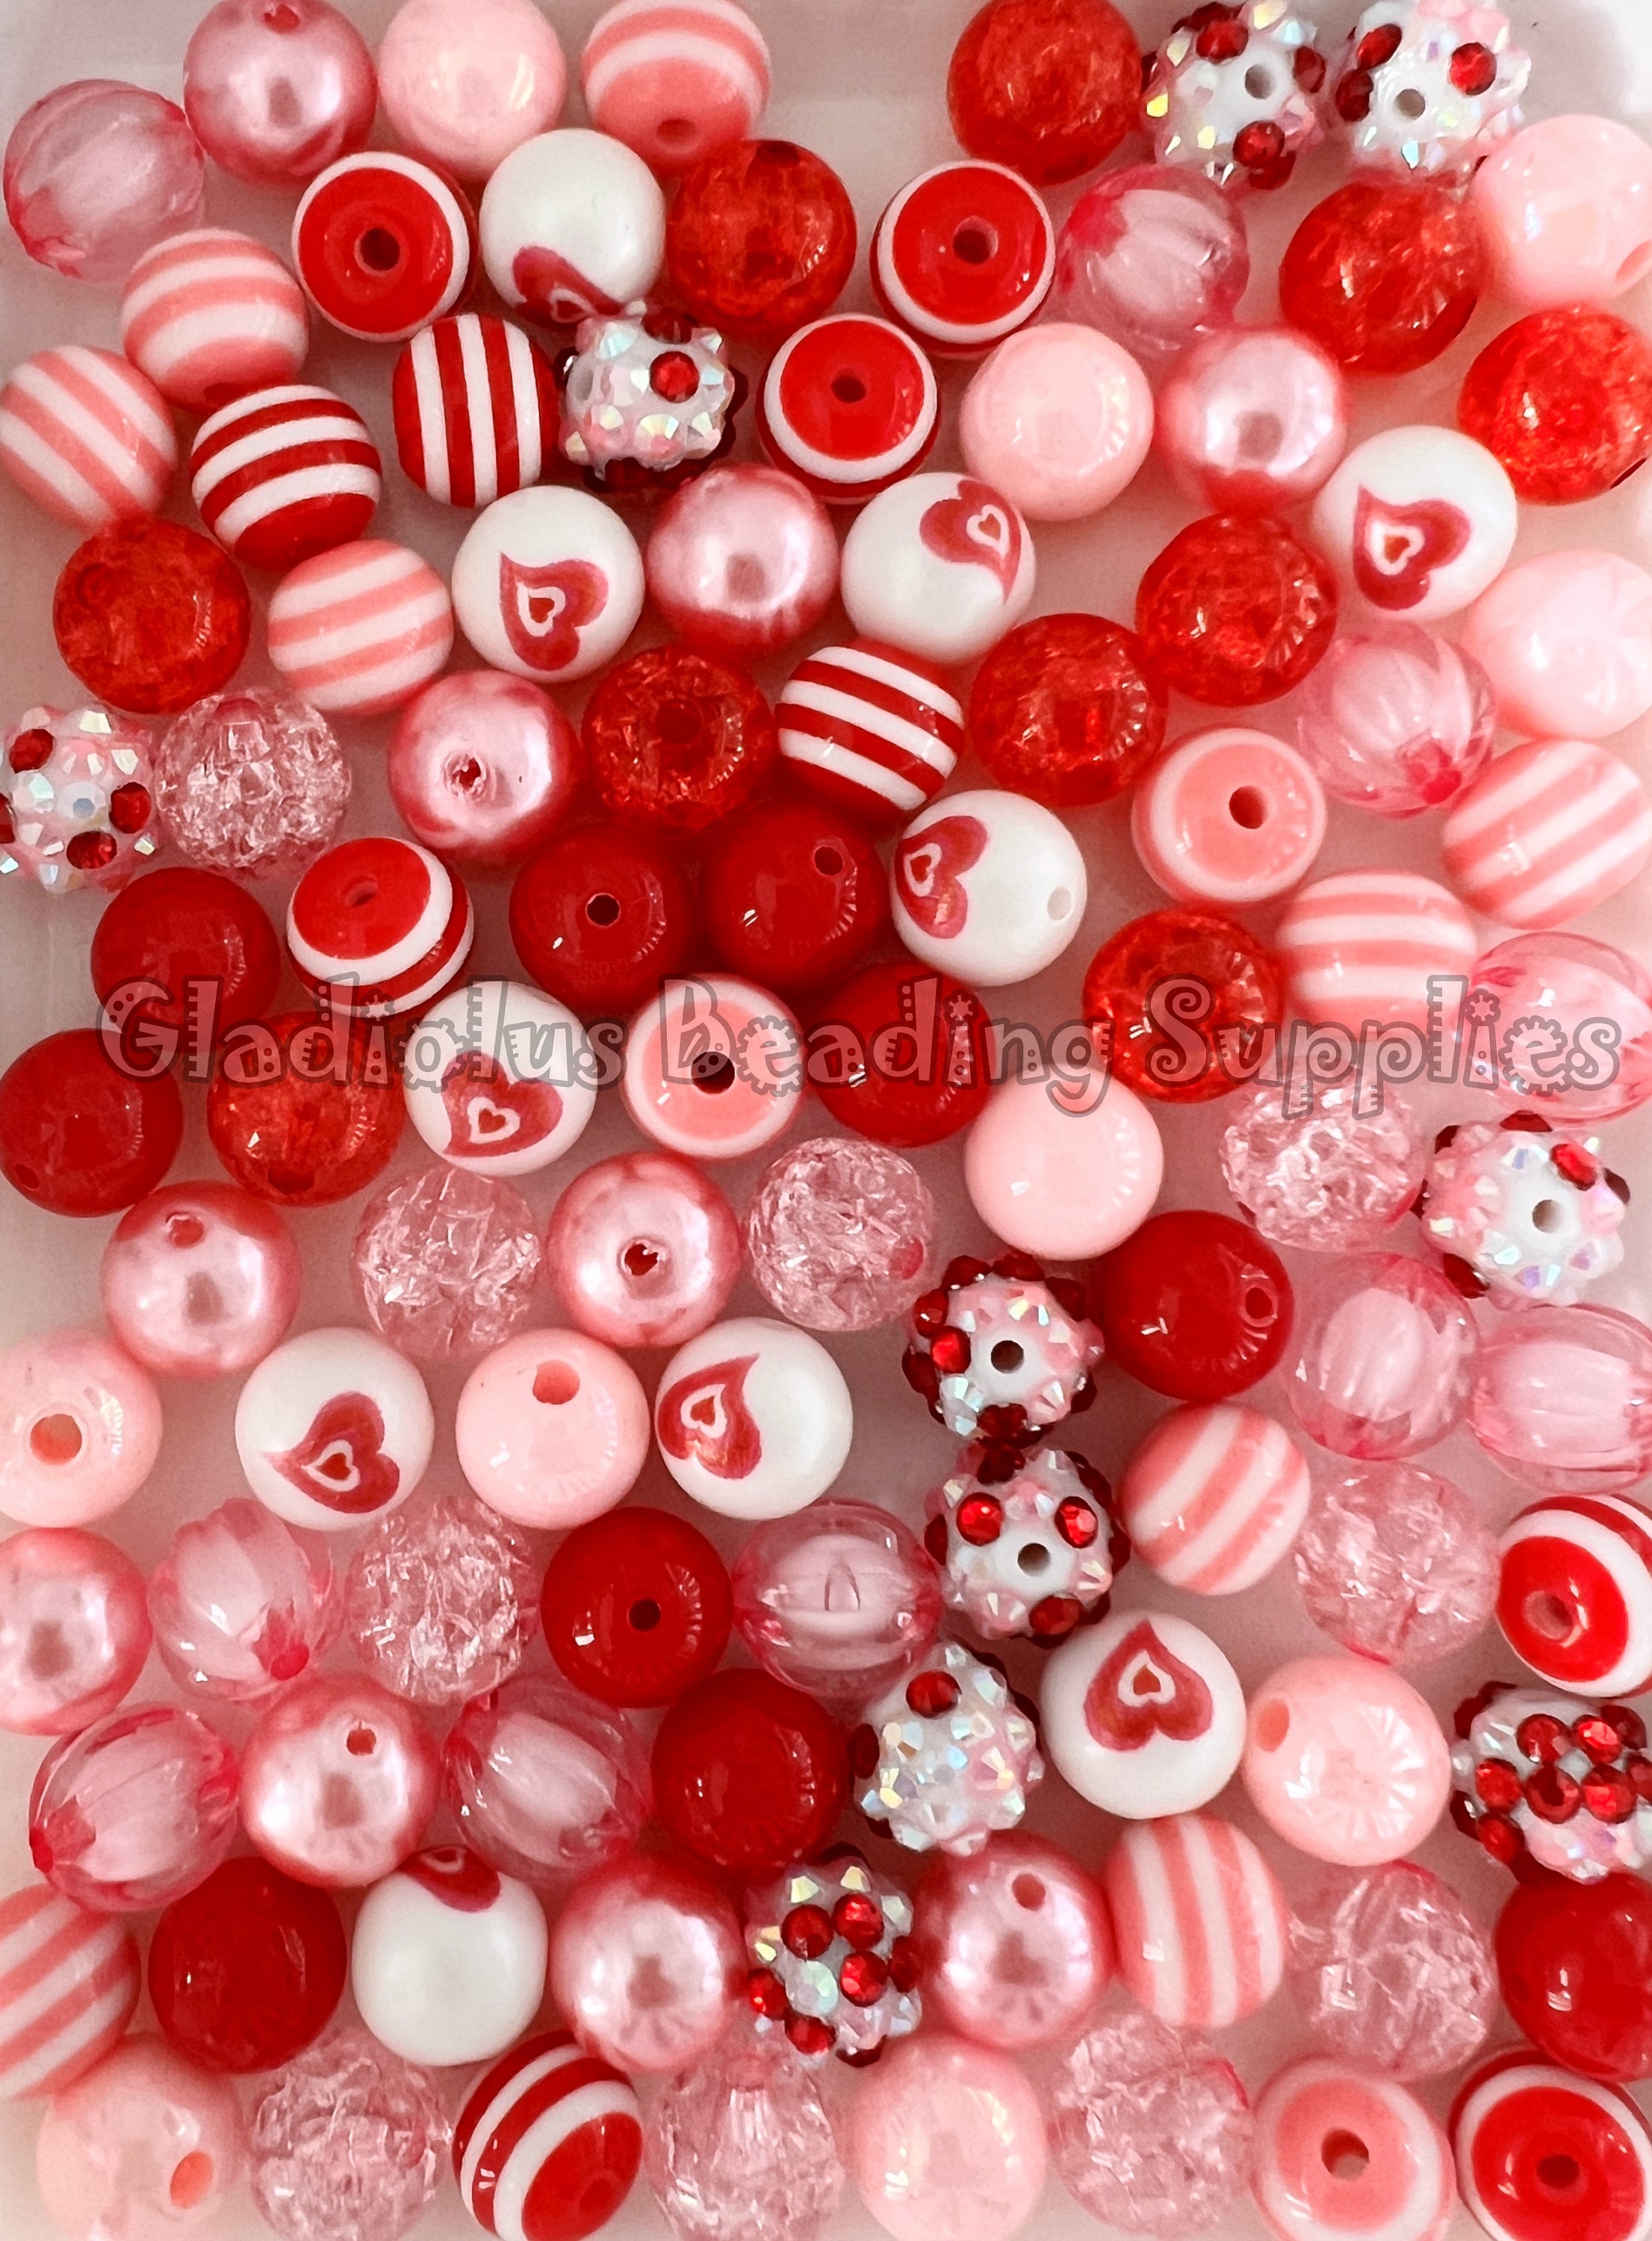 CEALXHENY 2300pcs+ valentines day beads for jewelry making, red